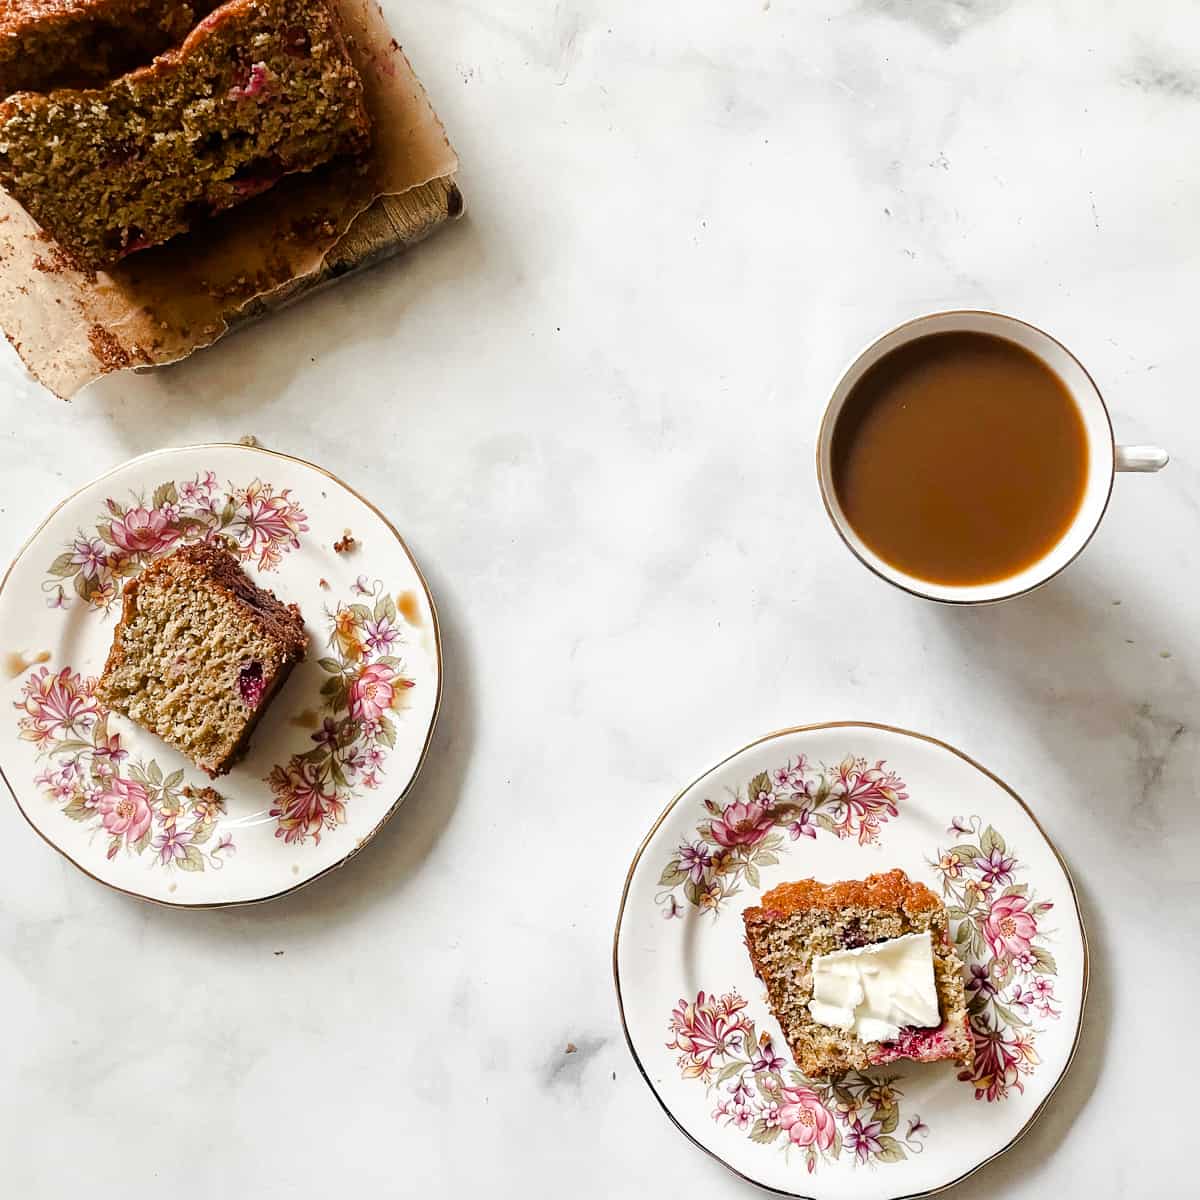 Slices of cranberry orange bread, a cup of tea, and more slices of bread.